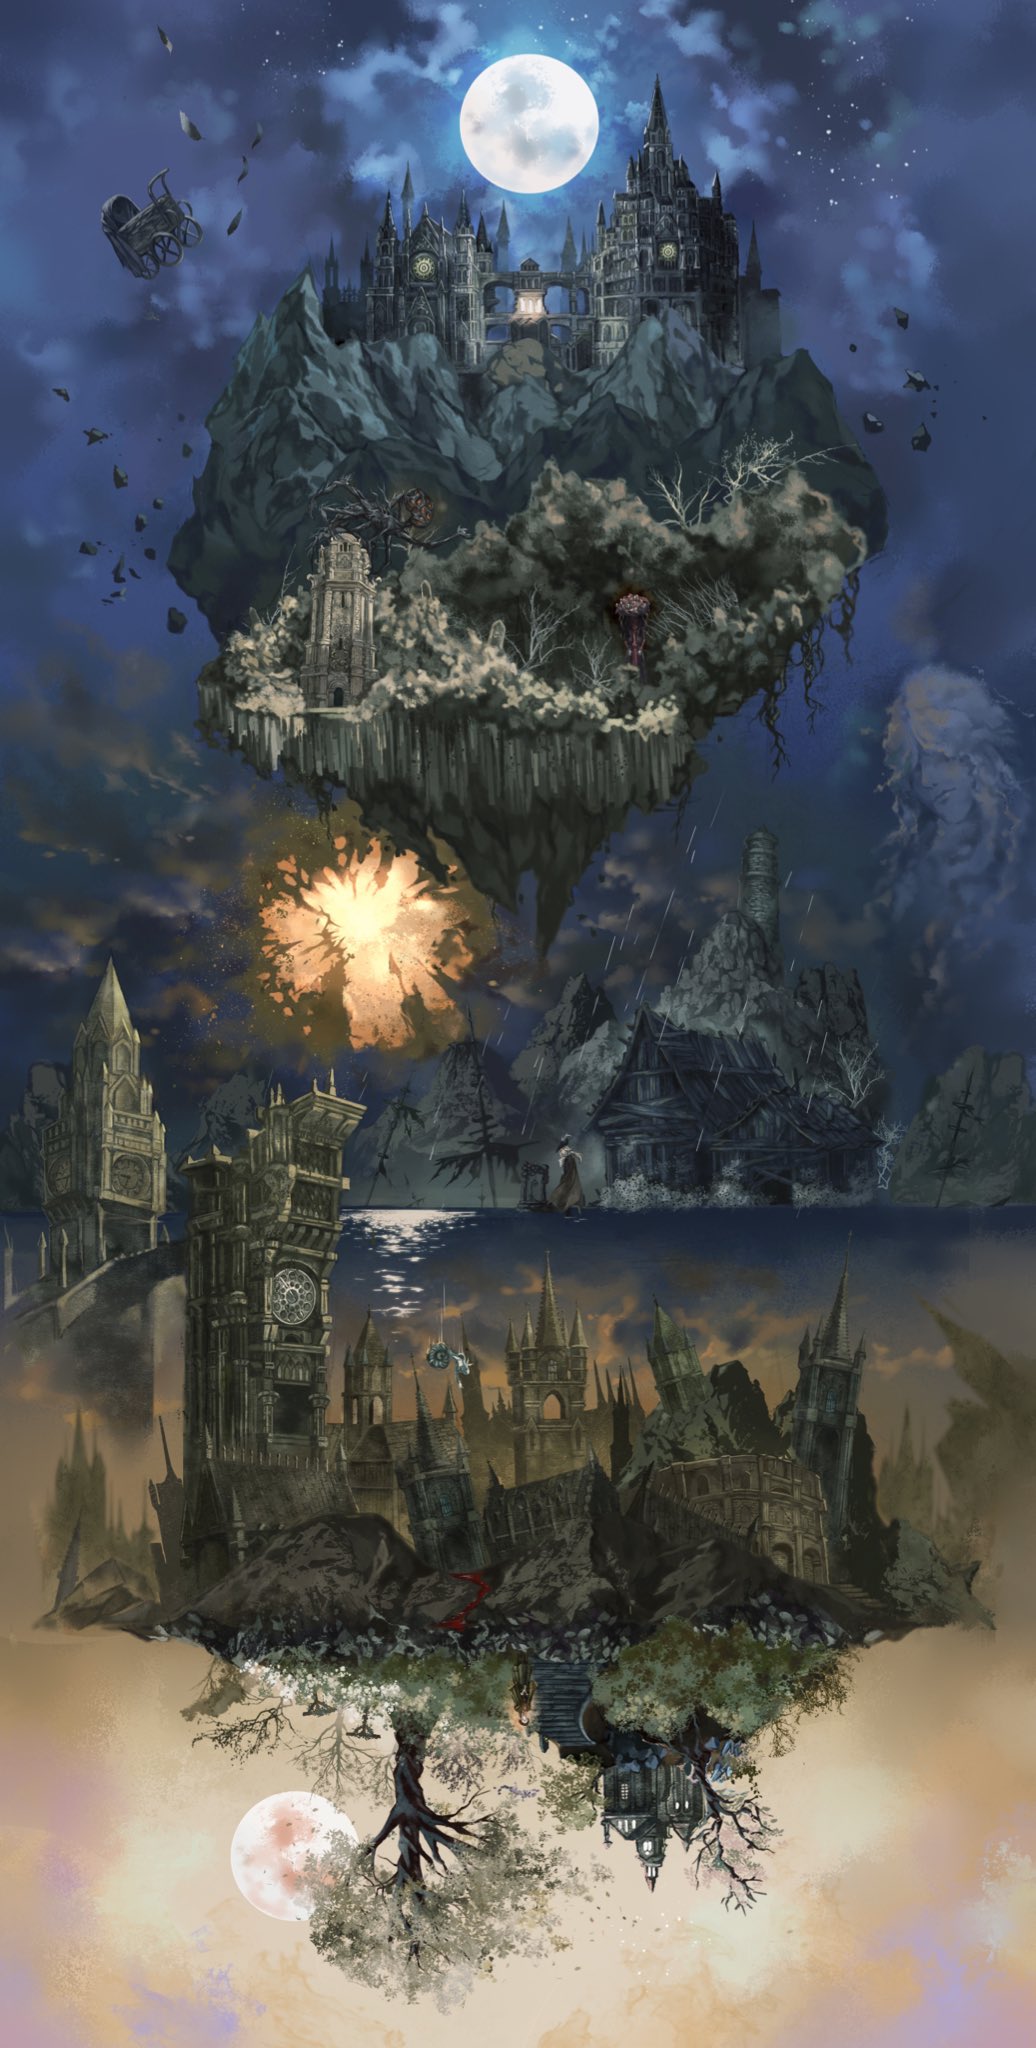 3girls amygdala architecture ascot blood bloodborne bonnet brain_of_mensis bush clock clock_tower cloud cloudy_sky coat day doll dress eldritch_abomination flying_buttress full_moon gothic gothic_architecture hat hat_feather highres kos_(bloodborne) lady_maria_of_the_astral_clocktower mergo's_wet_nurse moon multiple_girls night night_sky orphan_of_kos plain_doll ponytail post-apocalypse rain river riverbank roots ruins scenery sky star_(sky) starry_sky tower tree tricorne upside-down watchtower white_hair yharnam yujia0412